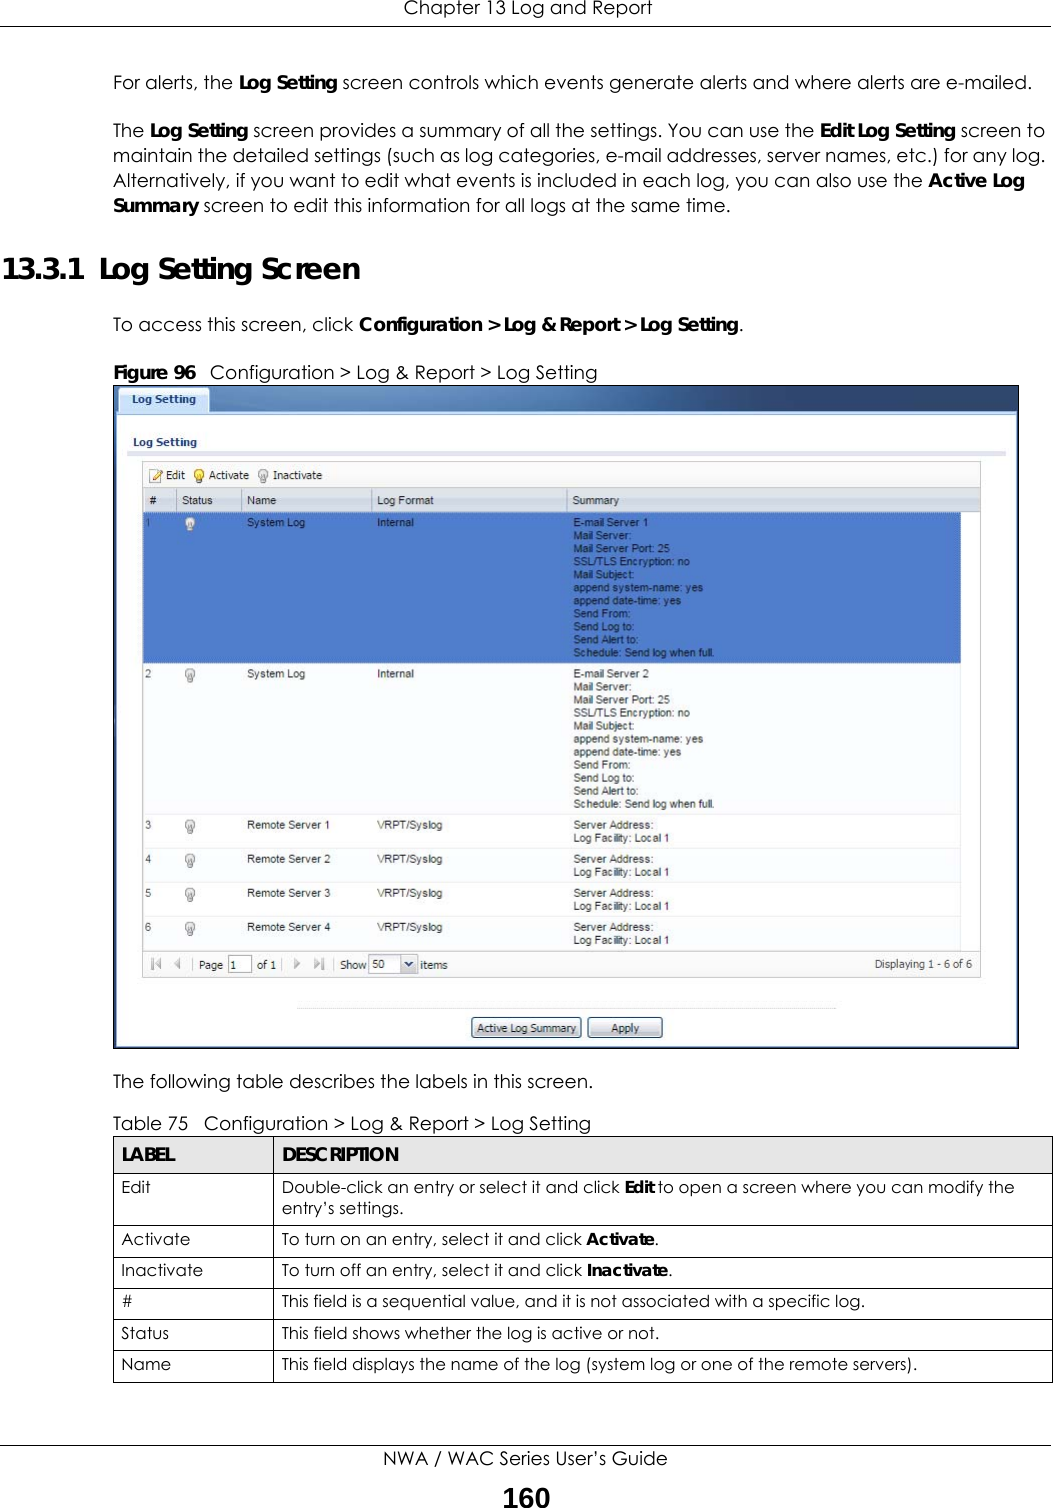  Chapter 13 Log and ReportNWA / WAC Series User’s Guide160For alerts, the Log Setting screen controls which events generate alerts and where alerts are e-mailed.The Log Setting screen provides a summary of all the settings. You can use the Edit Log Setting screen to maintain the detailed settings (such as log categories, e-mail addresses, server names, etc.) for any log. Alternatively, if you want to edit what events is included in each log, you can also use the Active Log Summary screen to edit this information for all logs at the same time.13.3.1  Log Setting ScreenTo access this screen, click Configuration &gt; Log &amp; Report &gt; Log Setting.Figure 96   Configuration &gt; Log &amp; Report &gt; Log SettingThe following table describes the labels in this screen. Table 75   Configuration &gt; Log &amp; Report &gt; Log SettingLABEL DESCRIPTIONEdit Double-click an entry or select it and click Edit to open a screen where you can modify the entry’s settings. Activate To turn on an entry, select it and click Activate.Inactivate To turn off an entry, select it and click Inactivate.# This field is a sequential value, and it is not associated with a specific log.Status This field shows whether the log is active or not.Name This field displays the name of the log (system log or one of the remote servers).